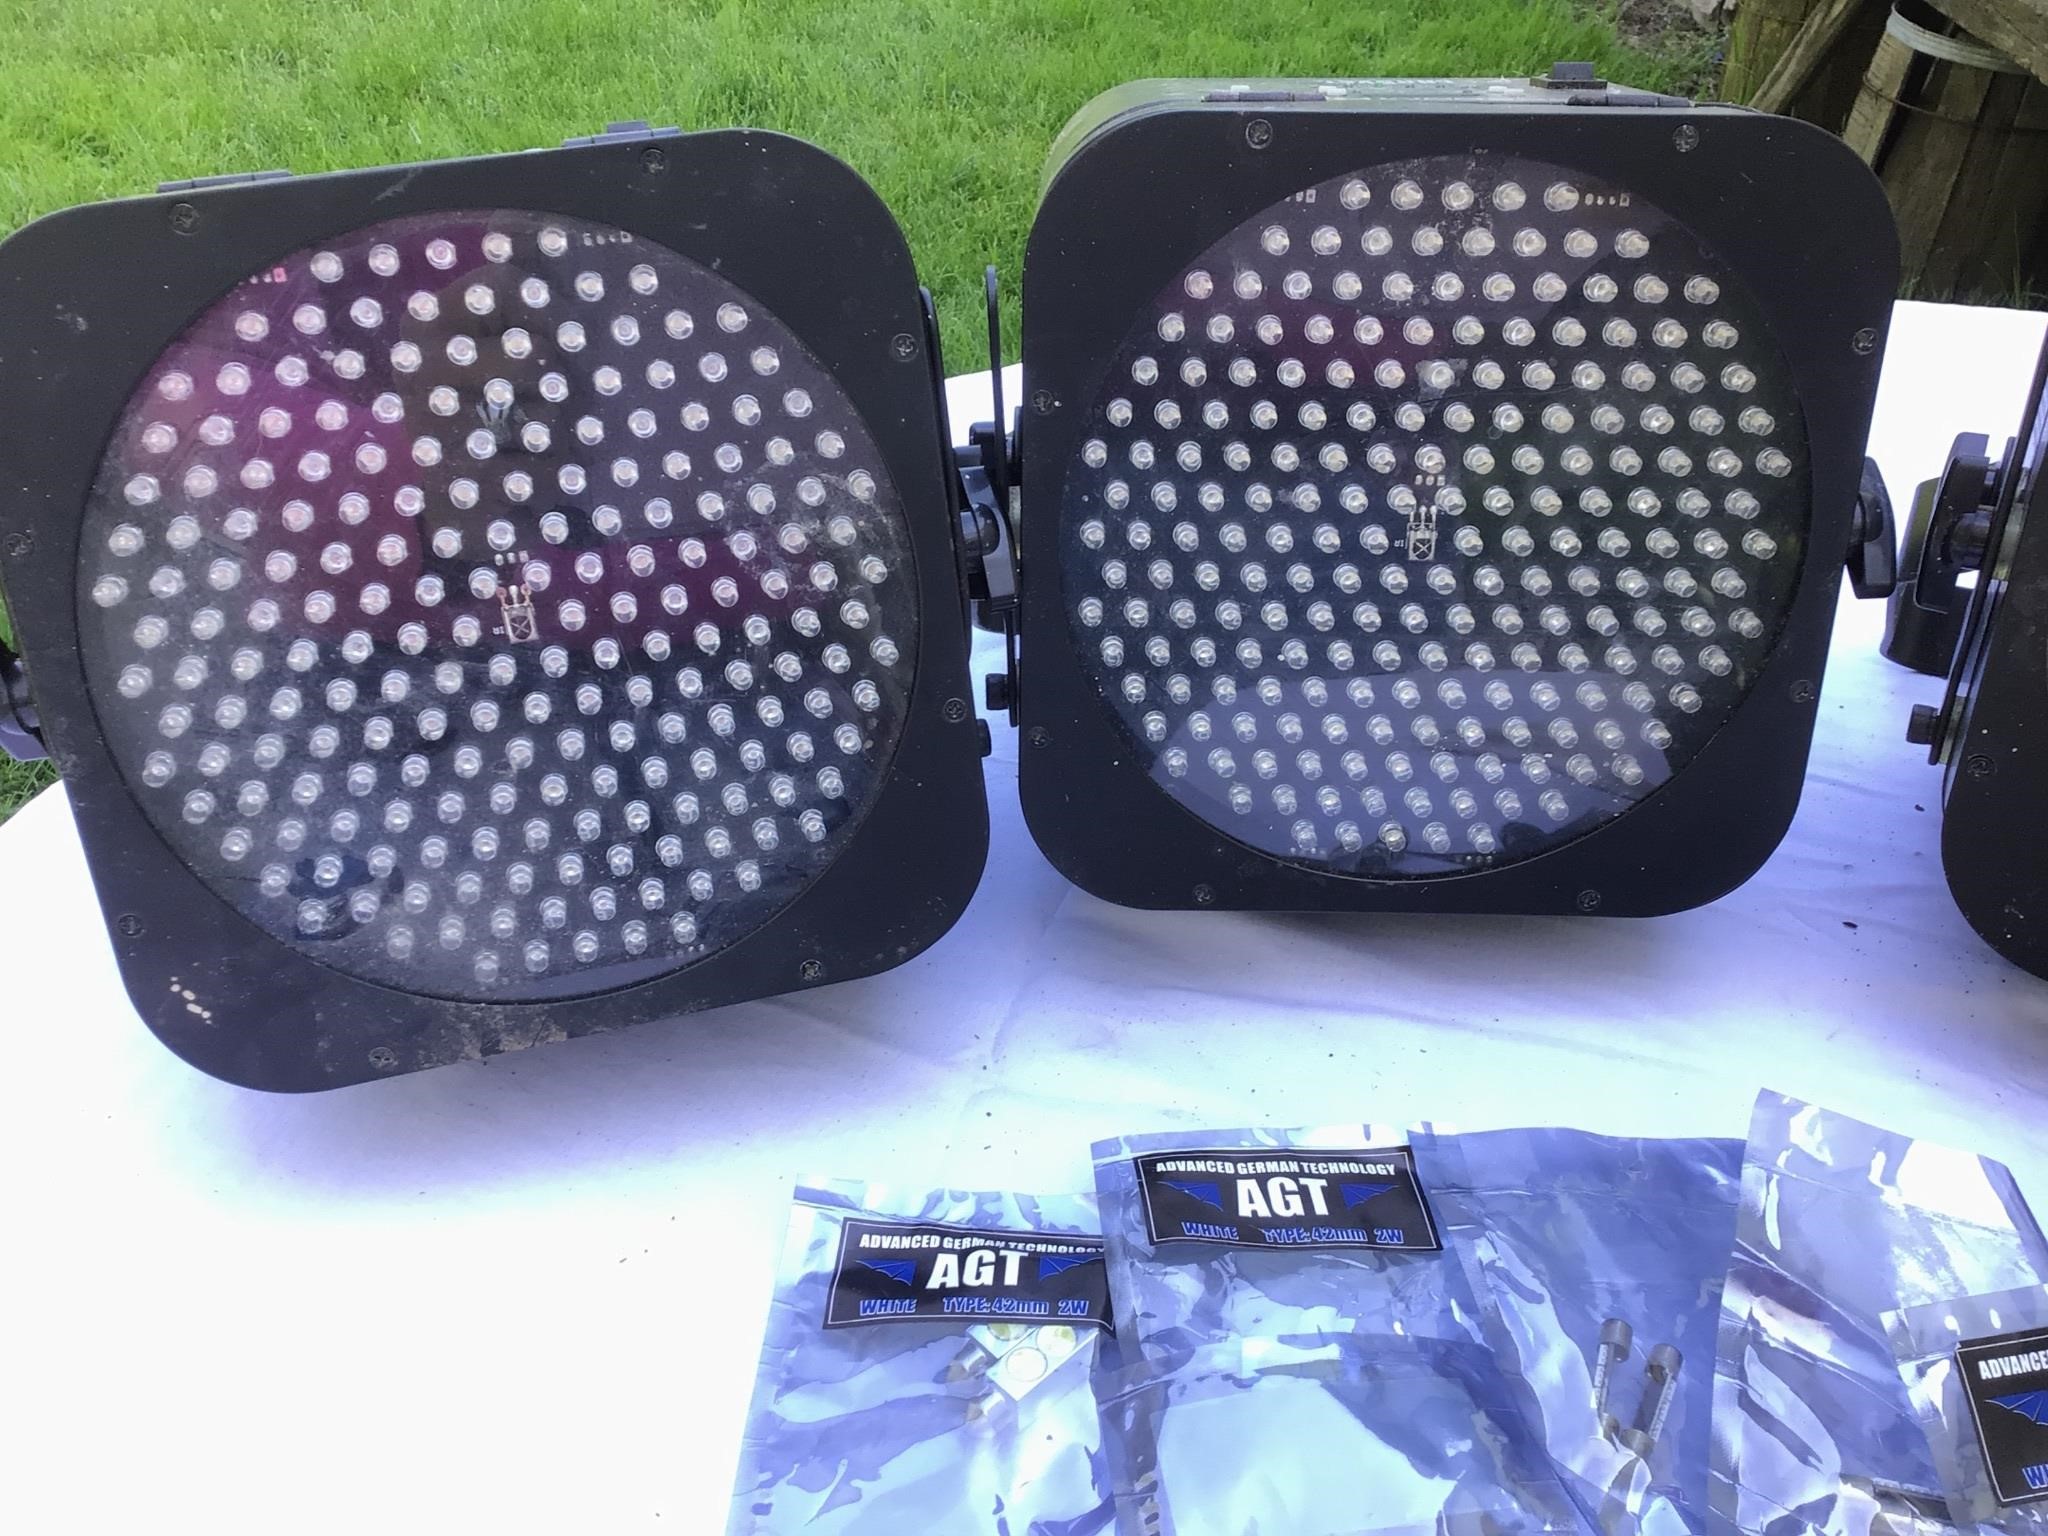 LED Lighting Lot w/ Extras includes 4 lights